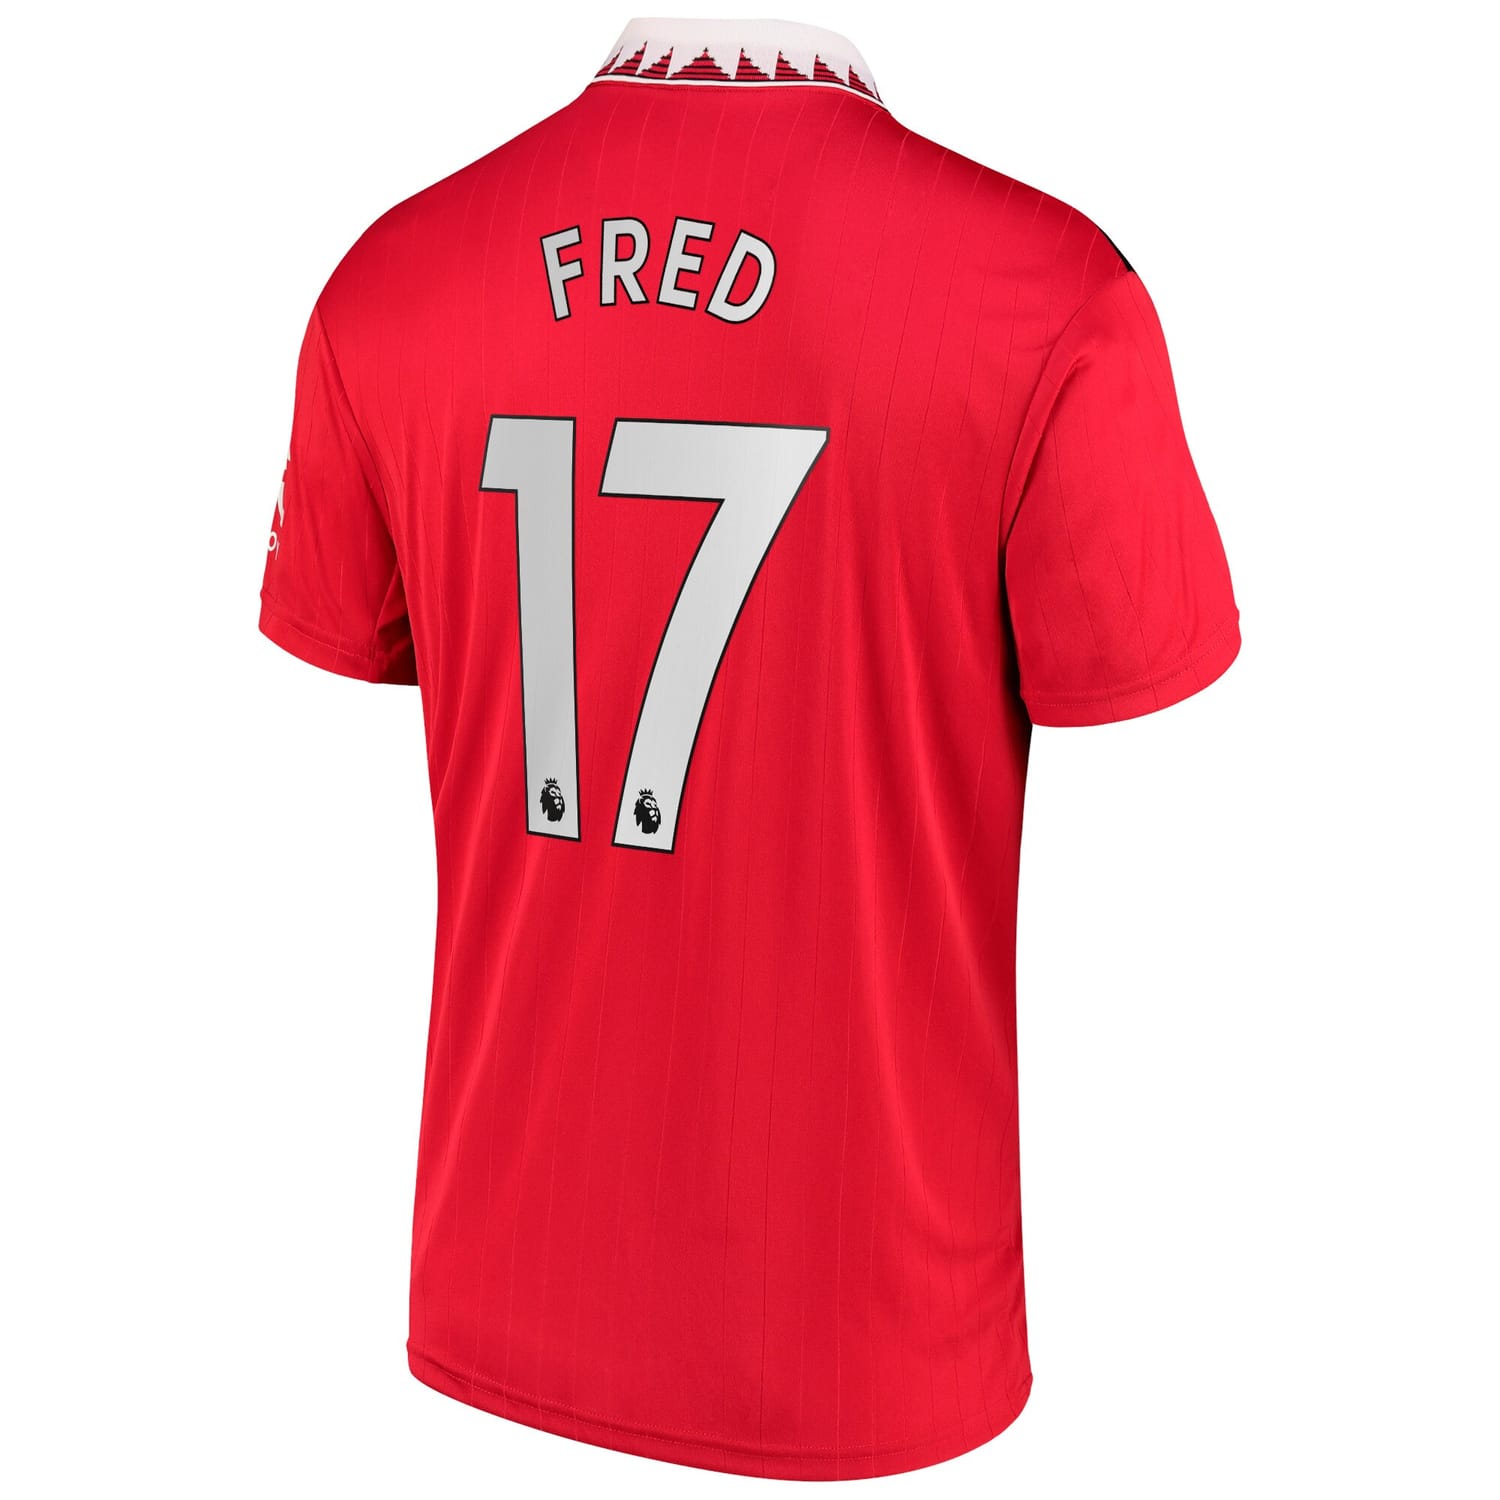 Premier League Manchester United Home Jersey Shirt 2022-23 player Fred 17 printing for Men